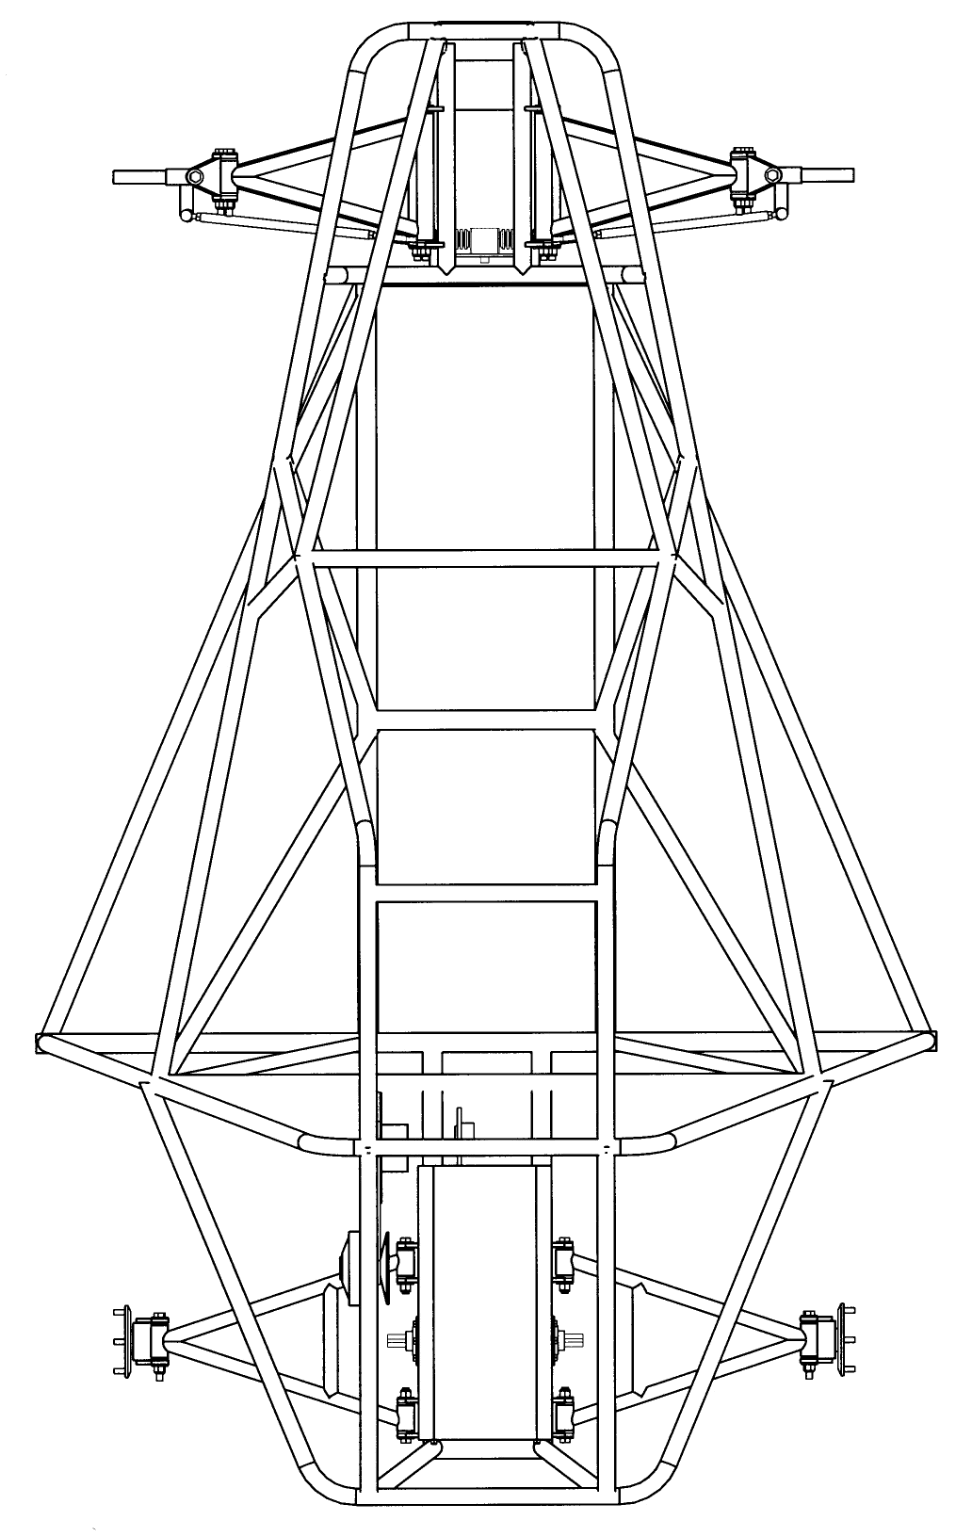 Top View for Specifications